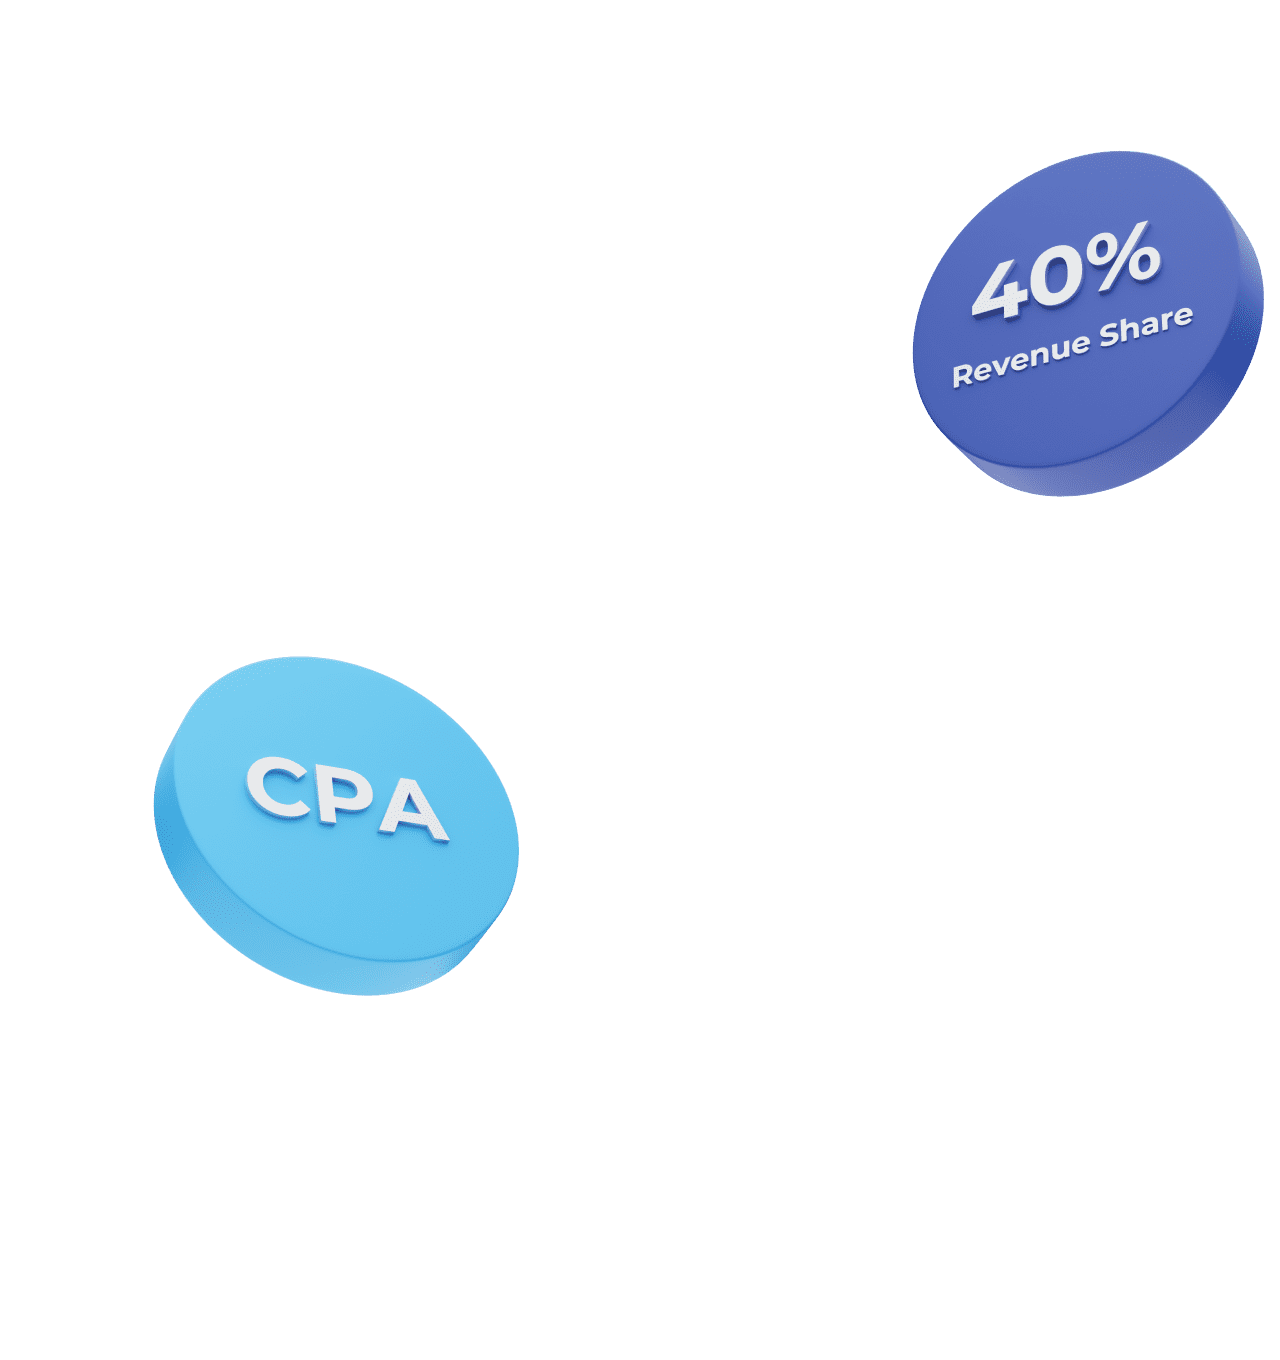 3d icons cpa and 40% revenue share